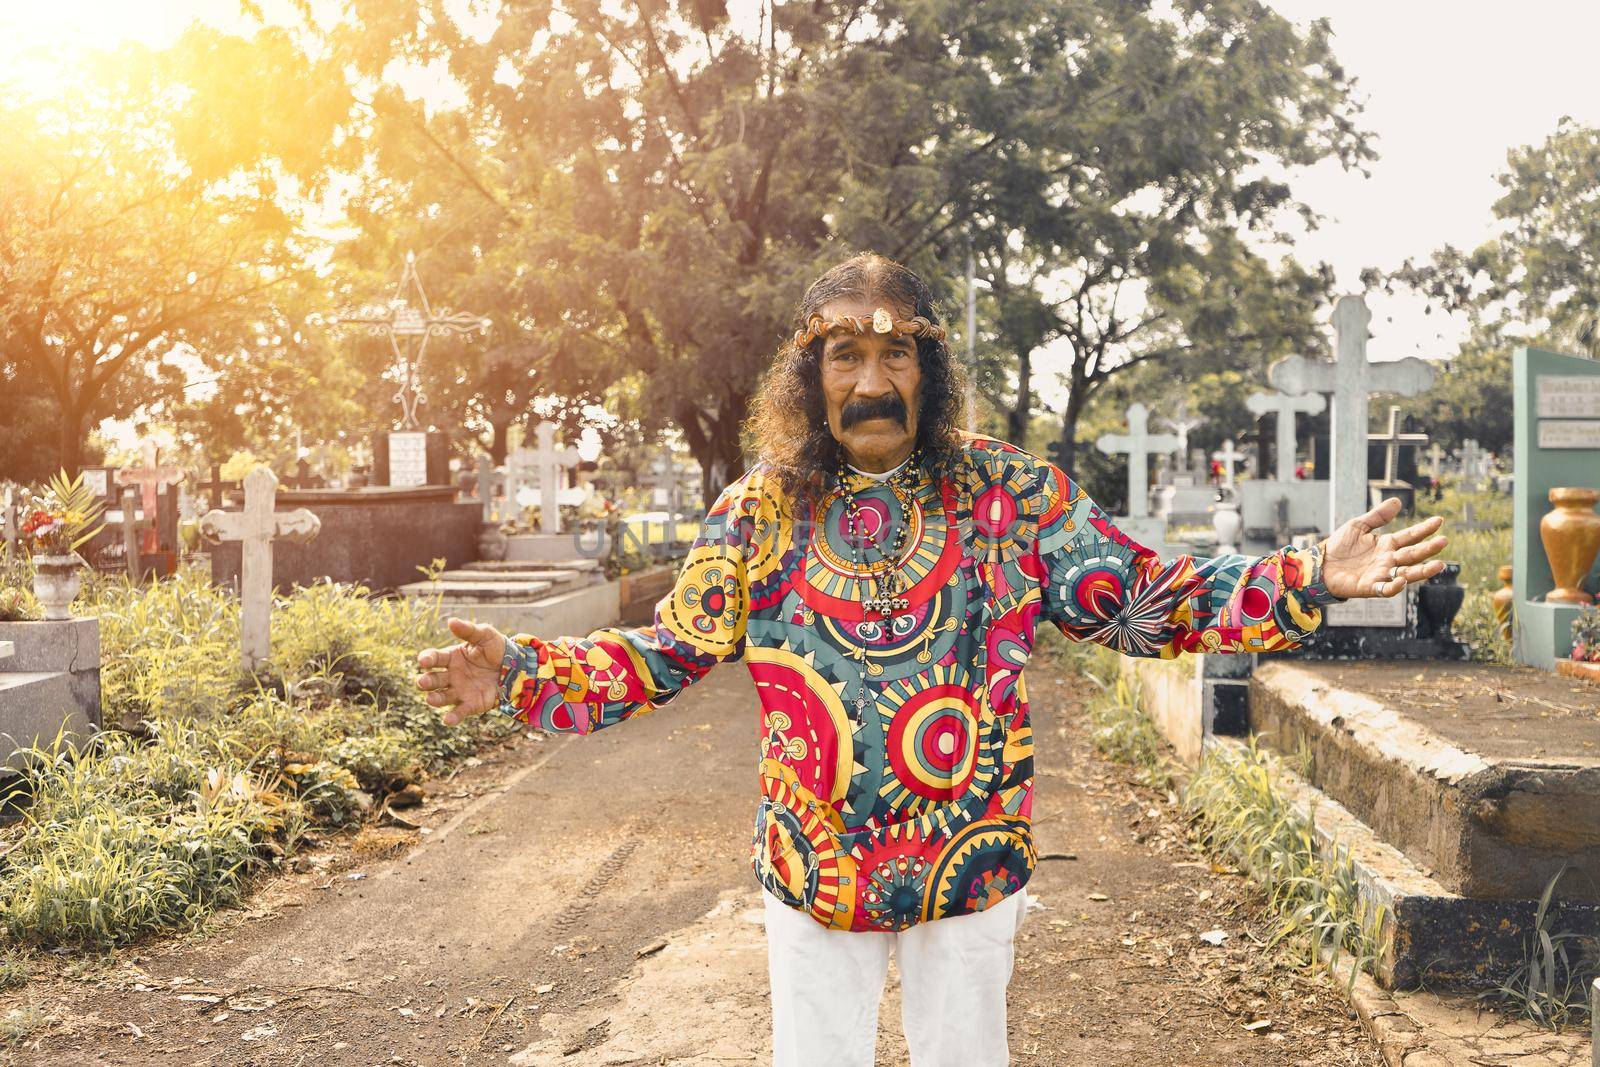 Elderly imitator of Christ with psychedelic clothing in a cemetery in Nicaragua by cfalvarez